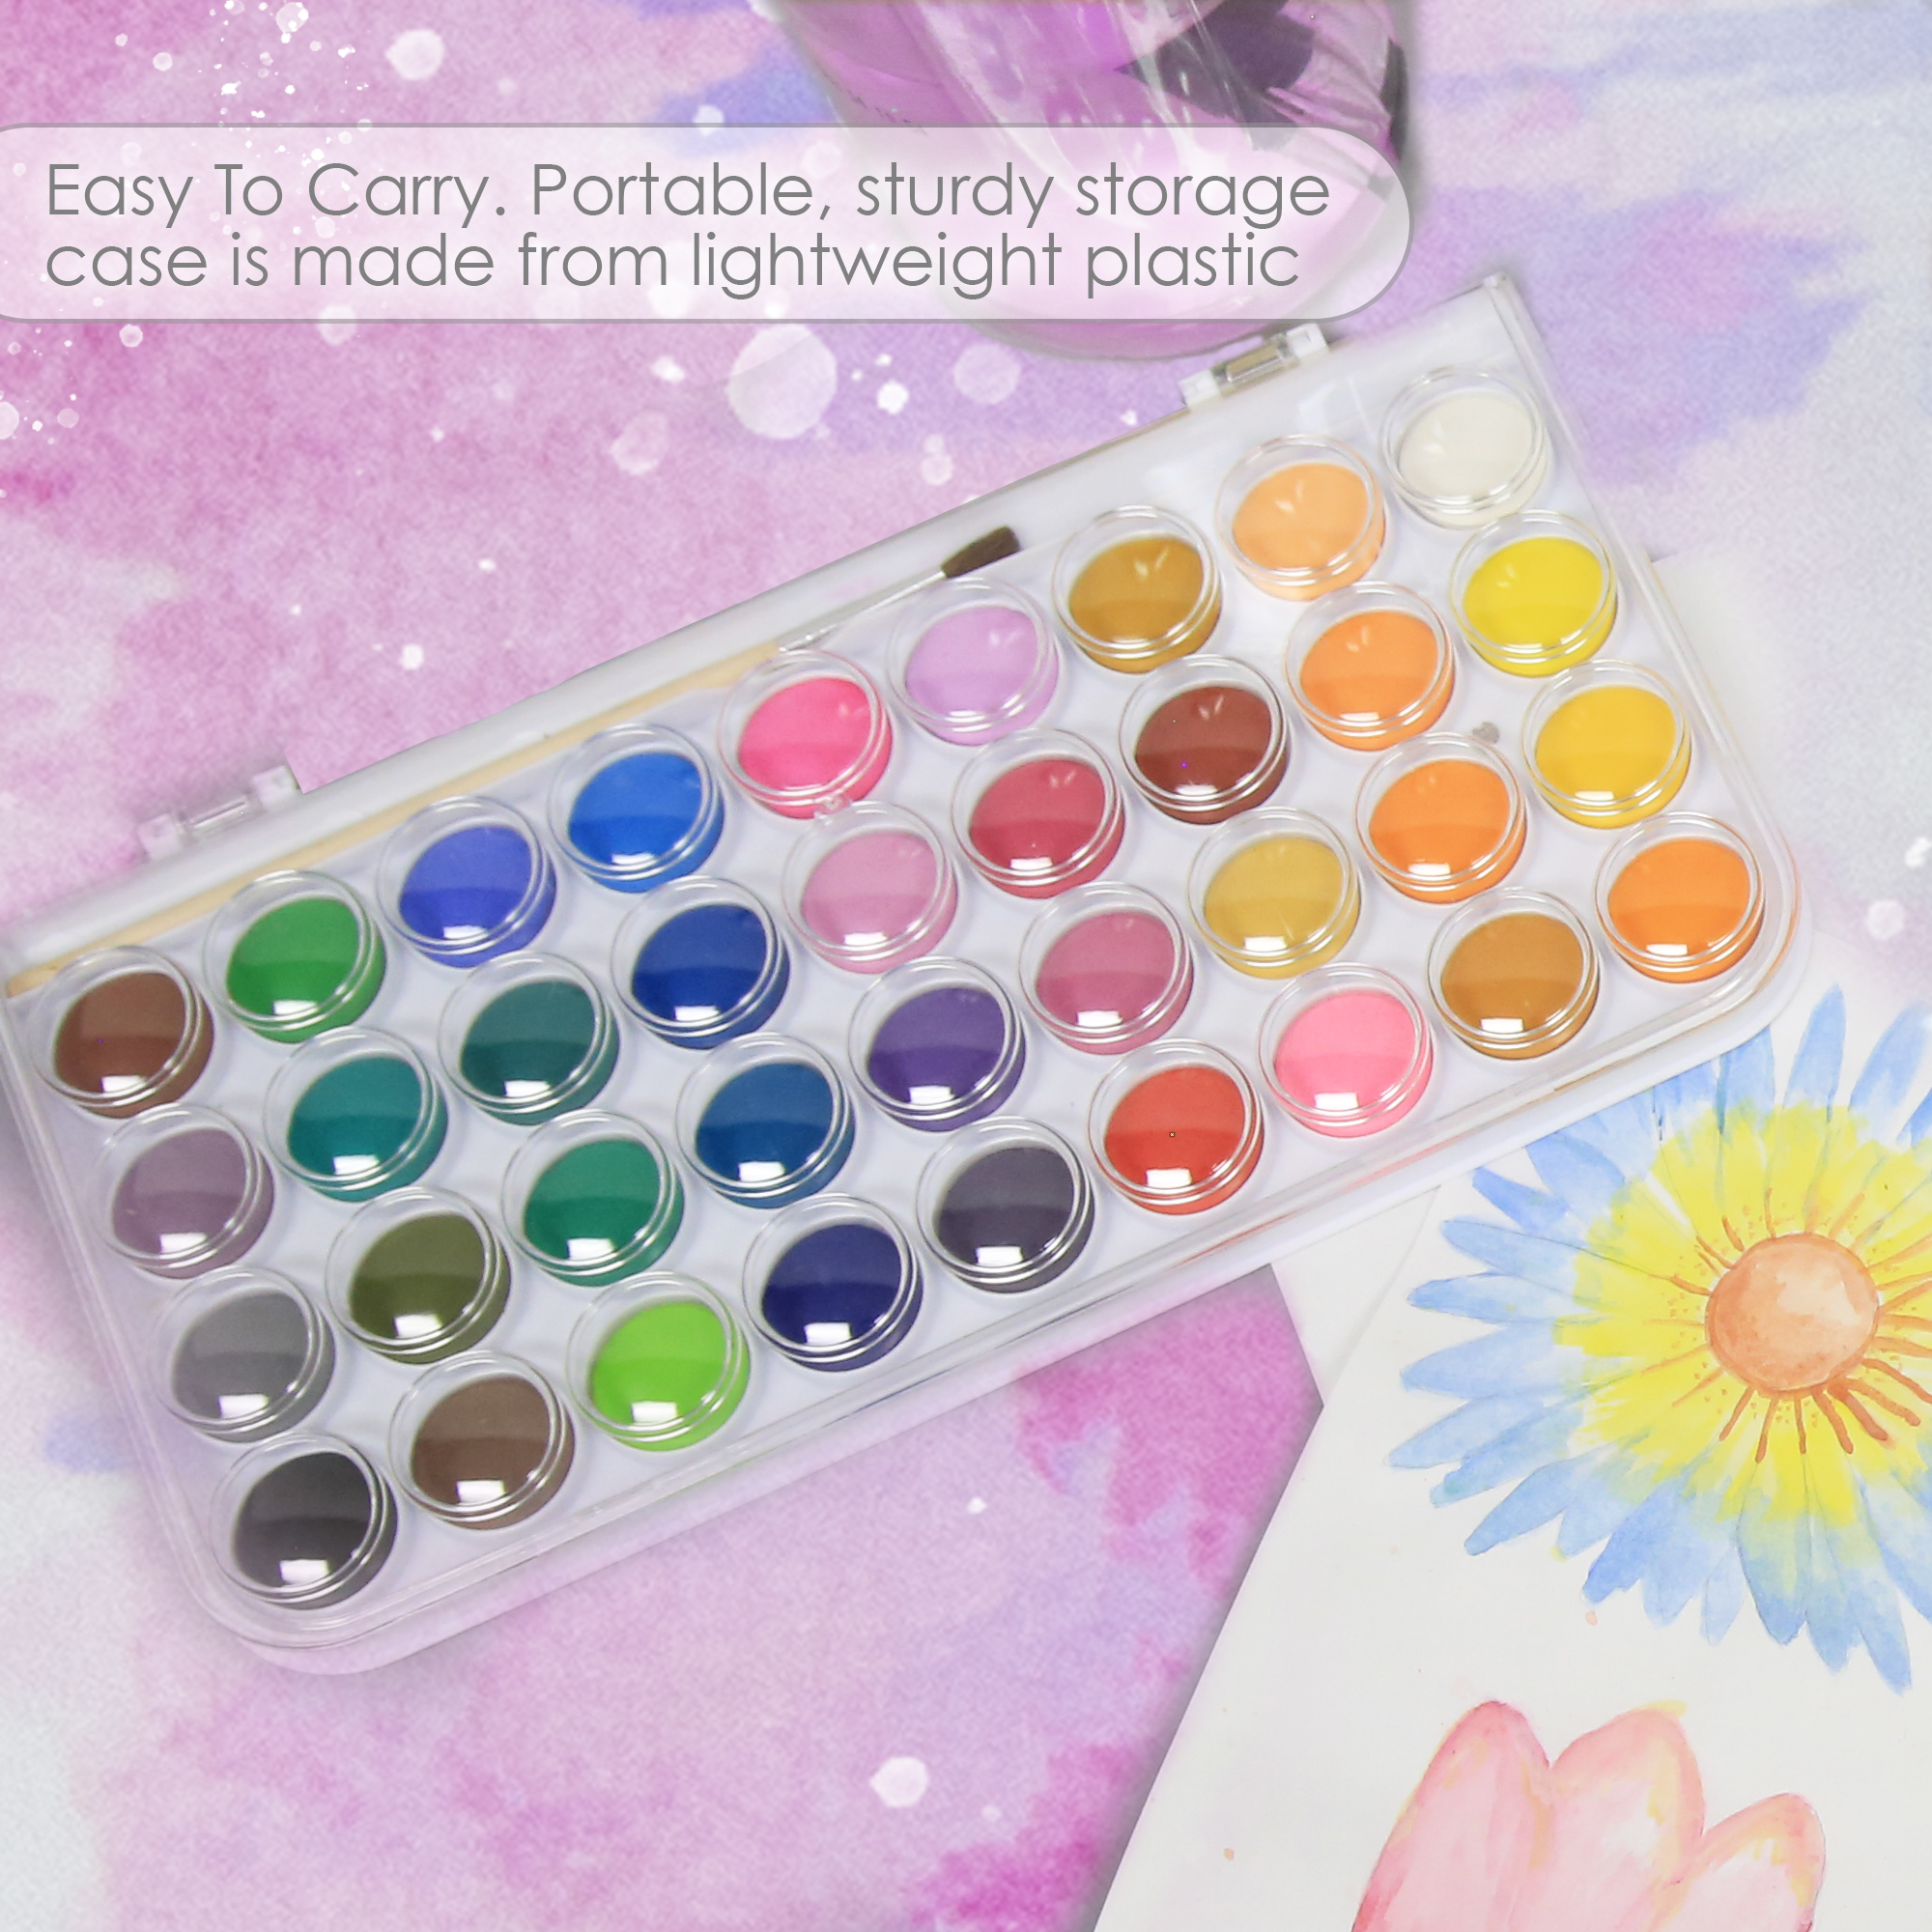 Painting Materials – The Watercolor and Gouache Paints and Brushes I use —  Four Wet Feet Studio